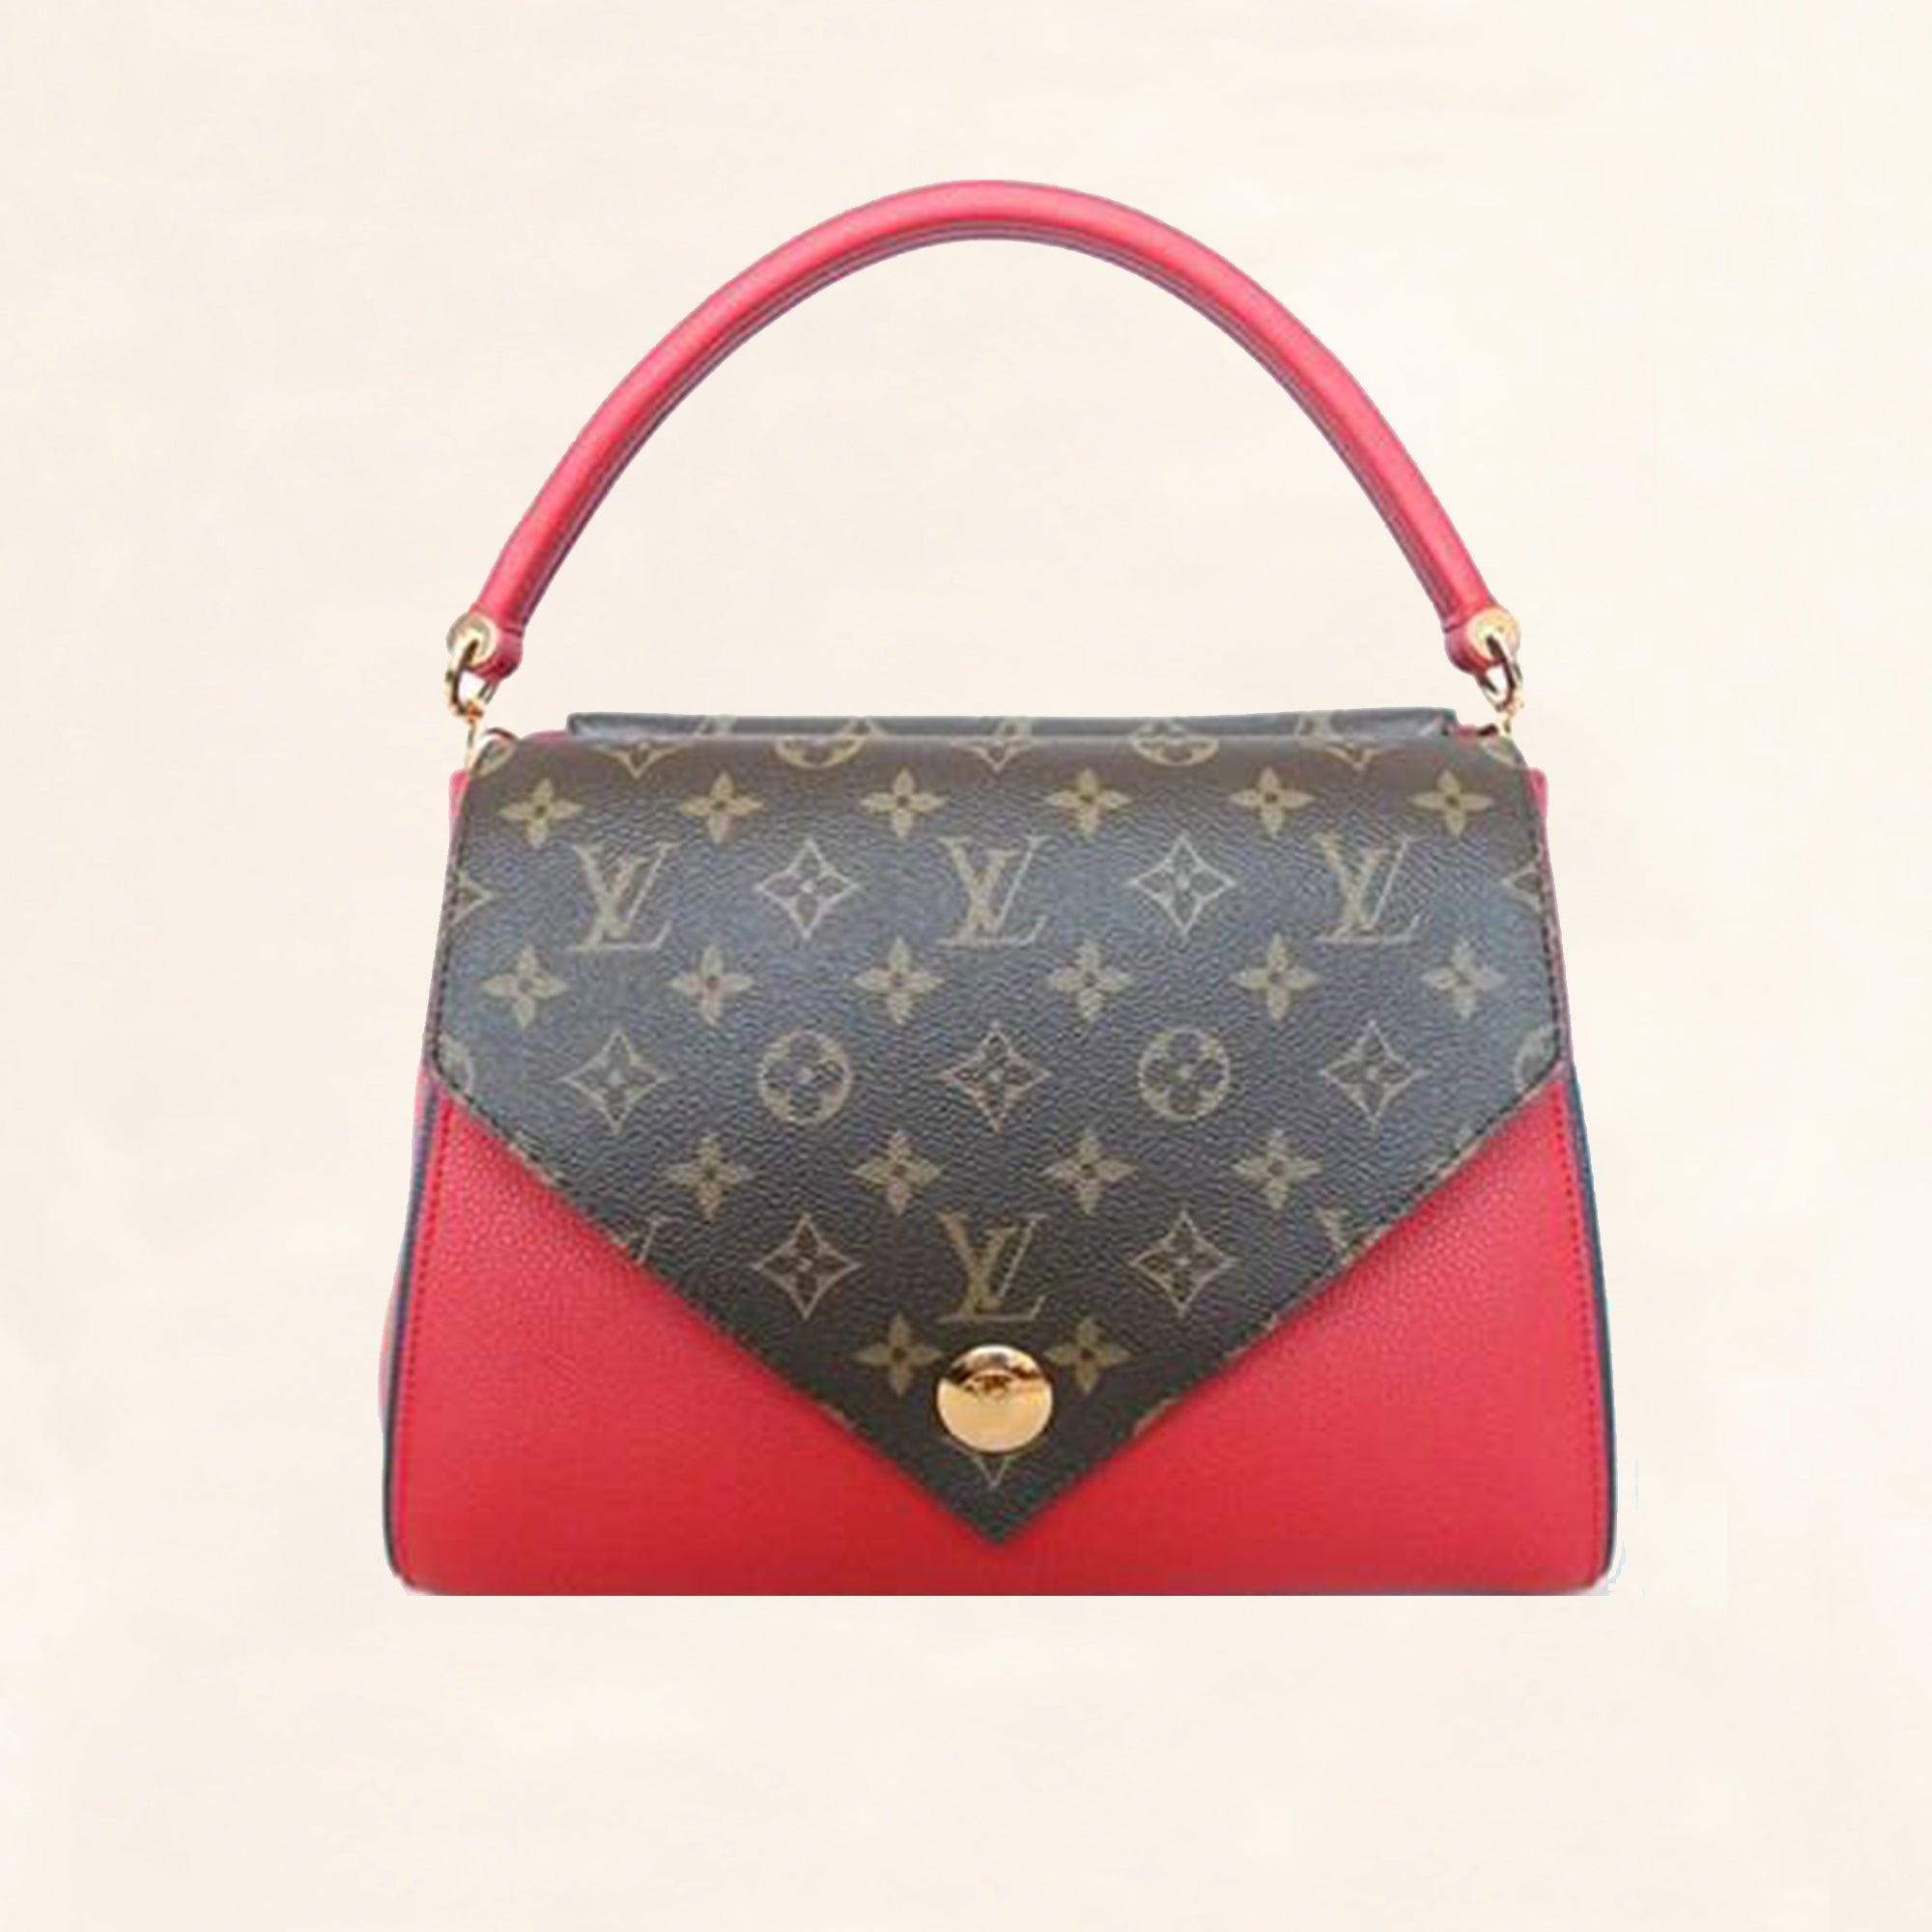 Louis Vuitton Double V Bag Reference Guide - Spotted Fashion